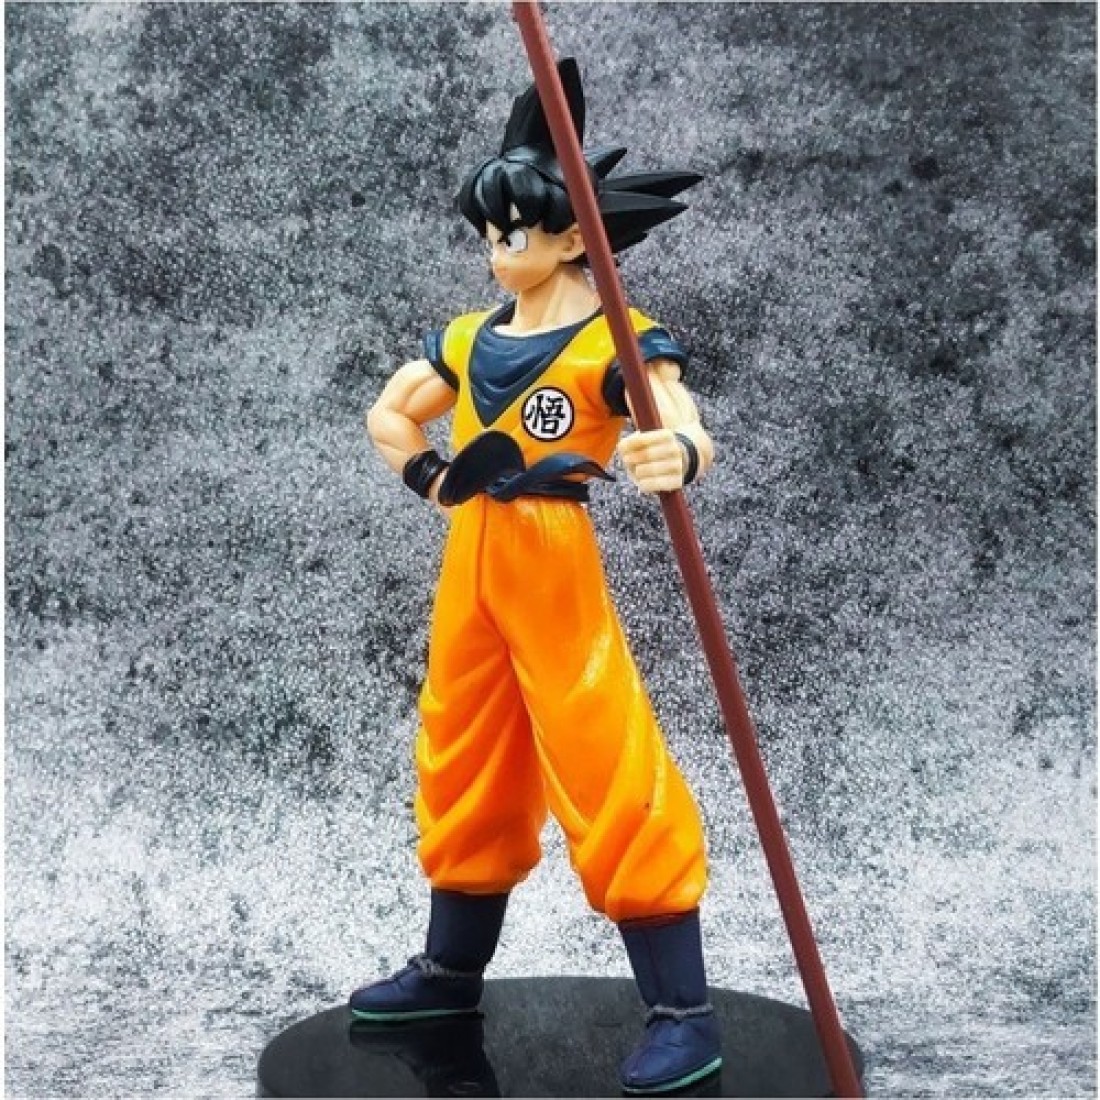 Toy Time: Dragon Ball Collectibles for Every Enthusiast